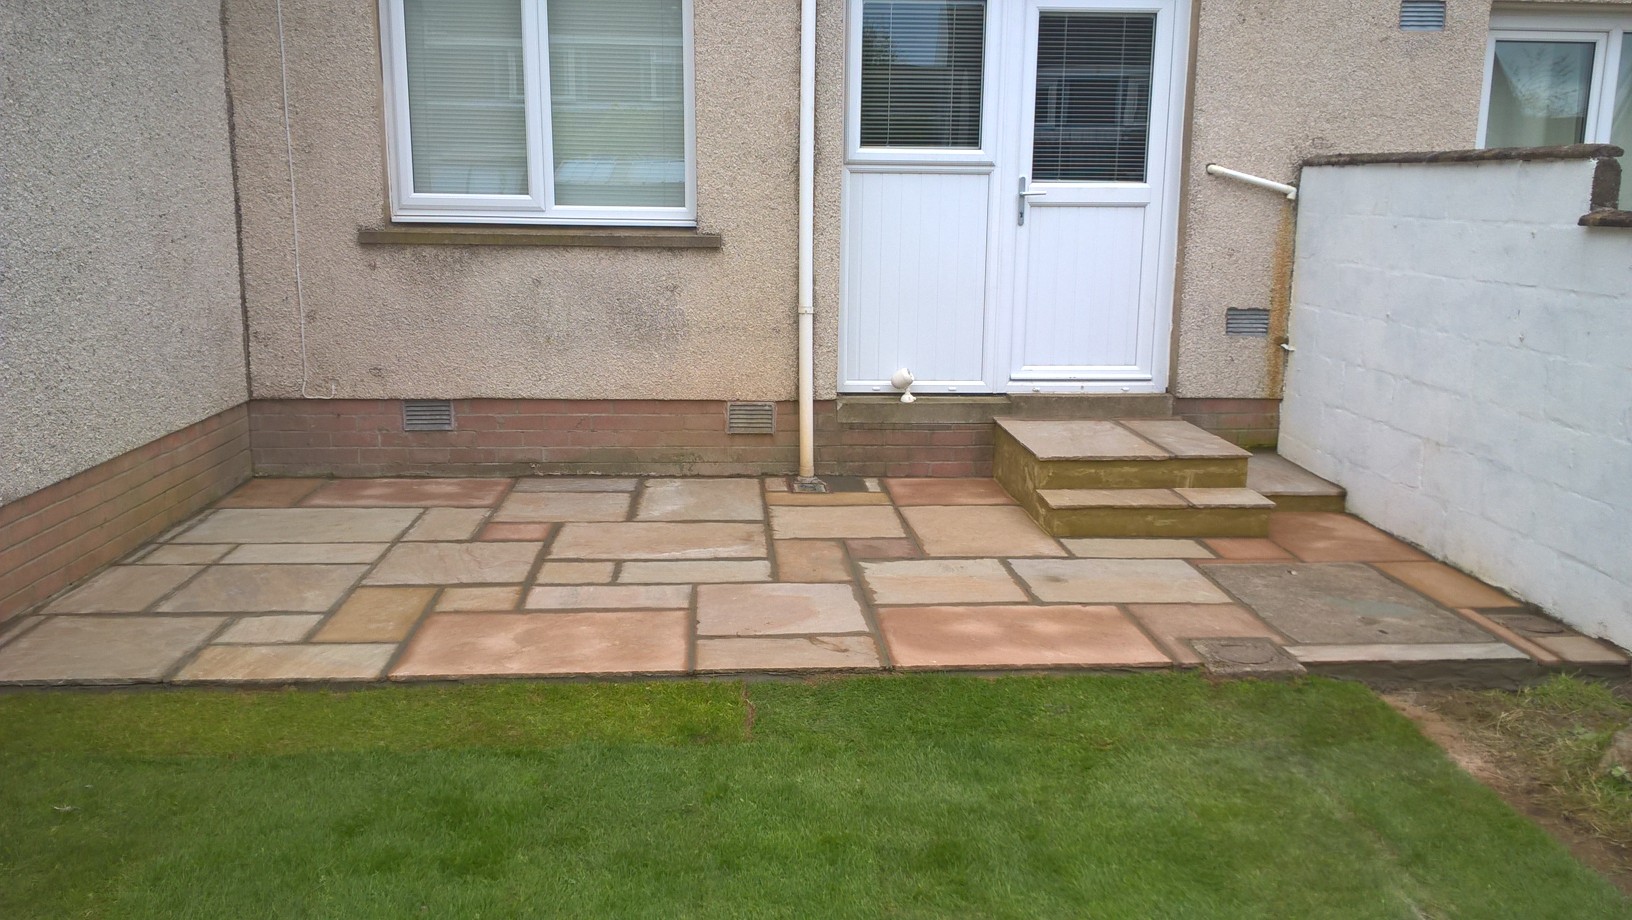 New patio, steps and lawn